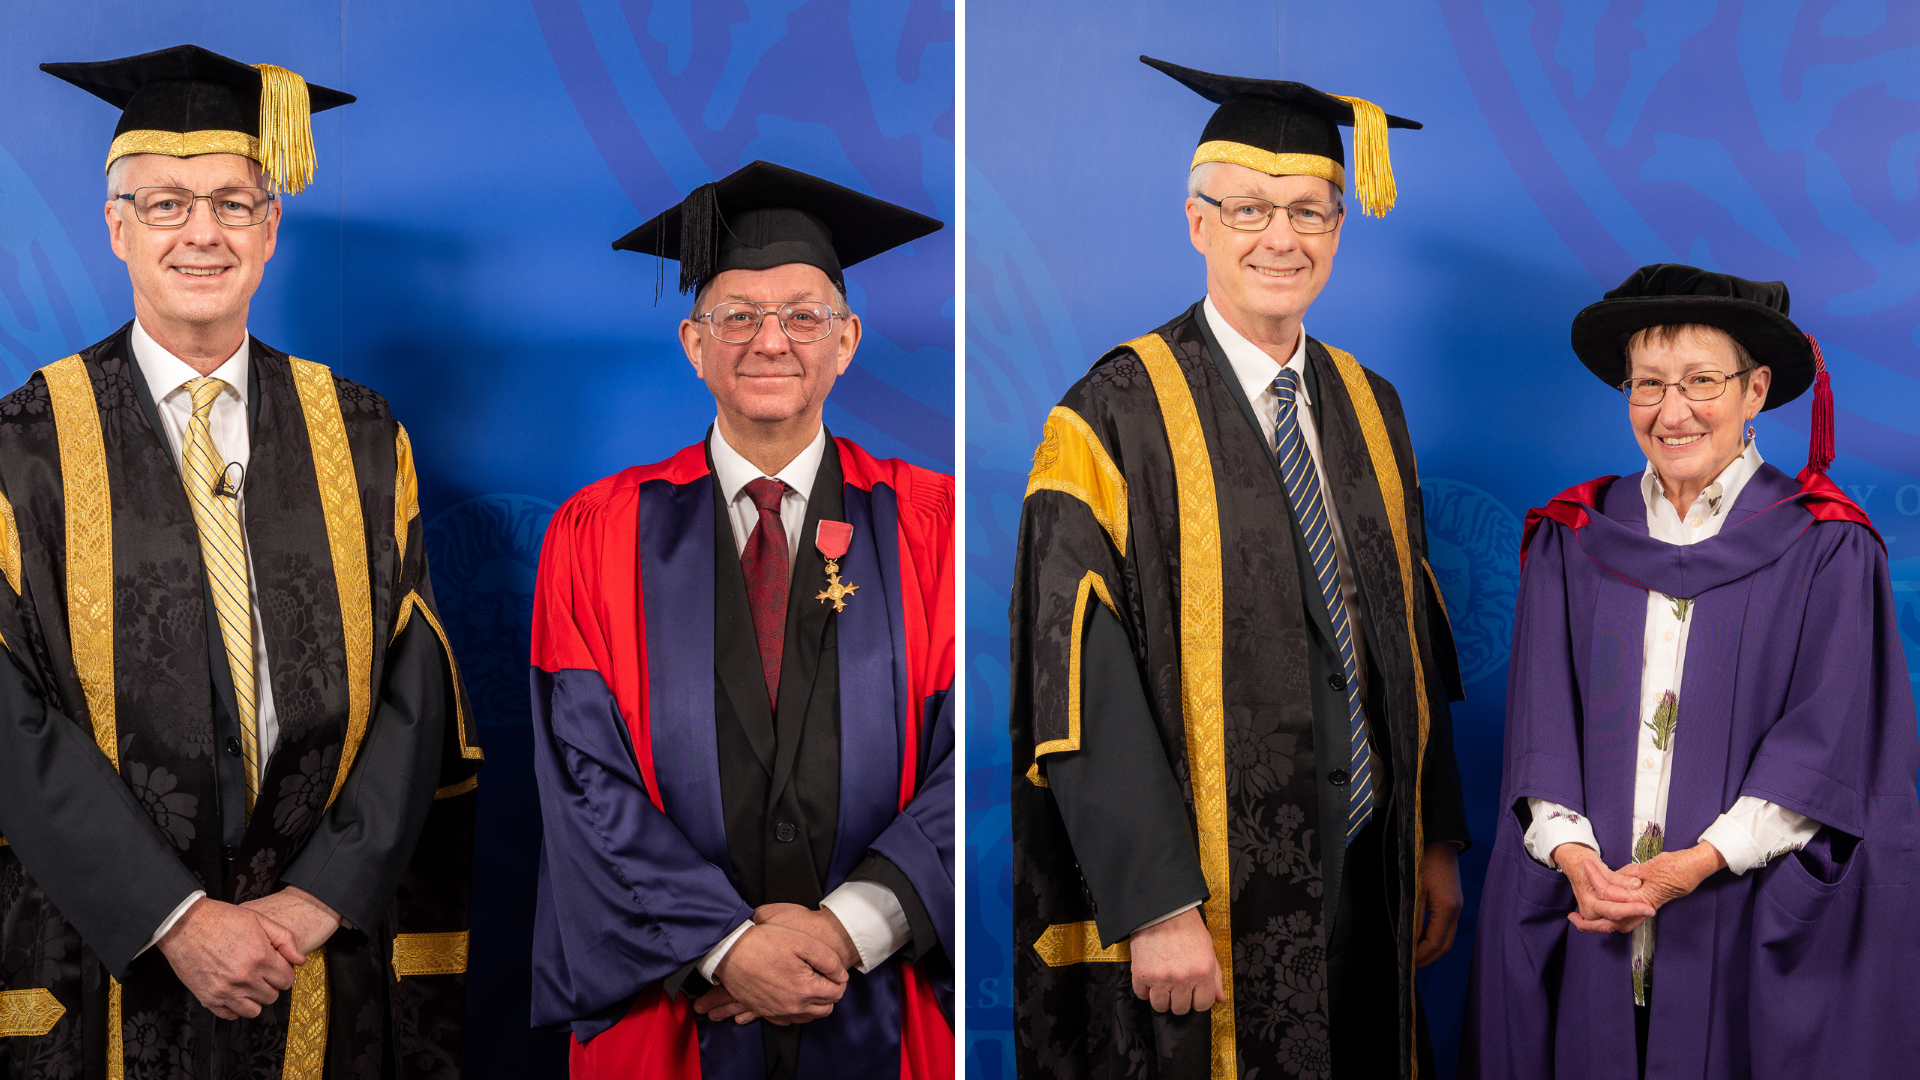 Vice-Chancellor and President Professor Ian White with Professors Linda Newnes and Chris Budd